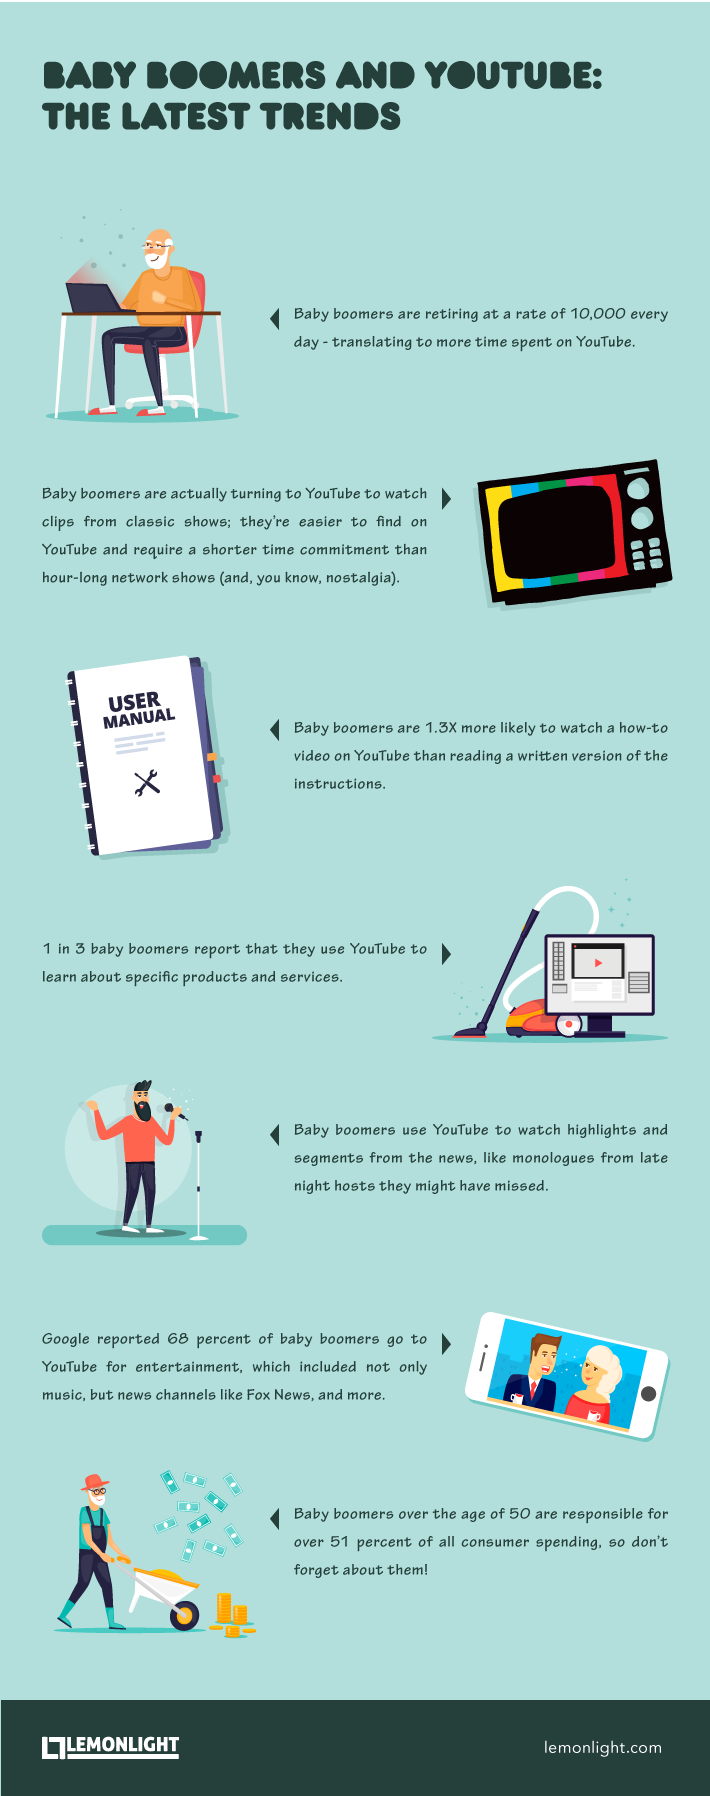 An infographic showing Baby Boomers and Youtube: The Latest Trends